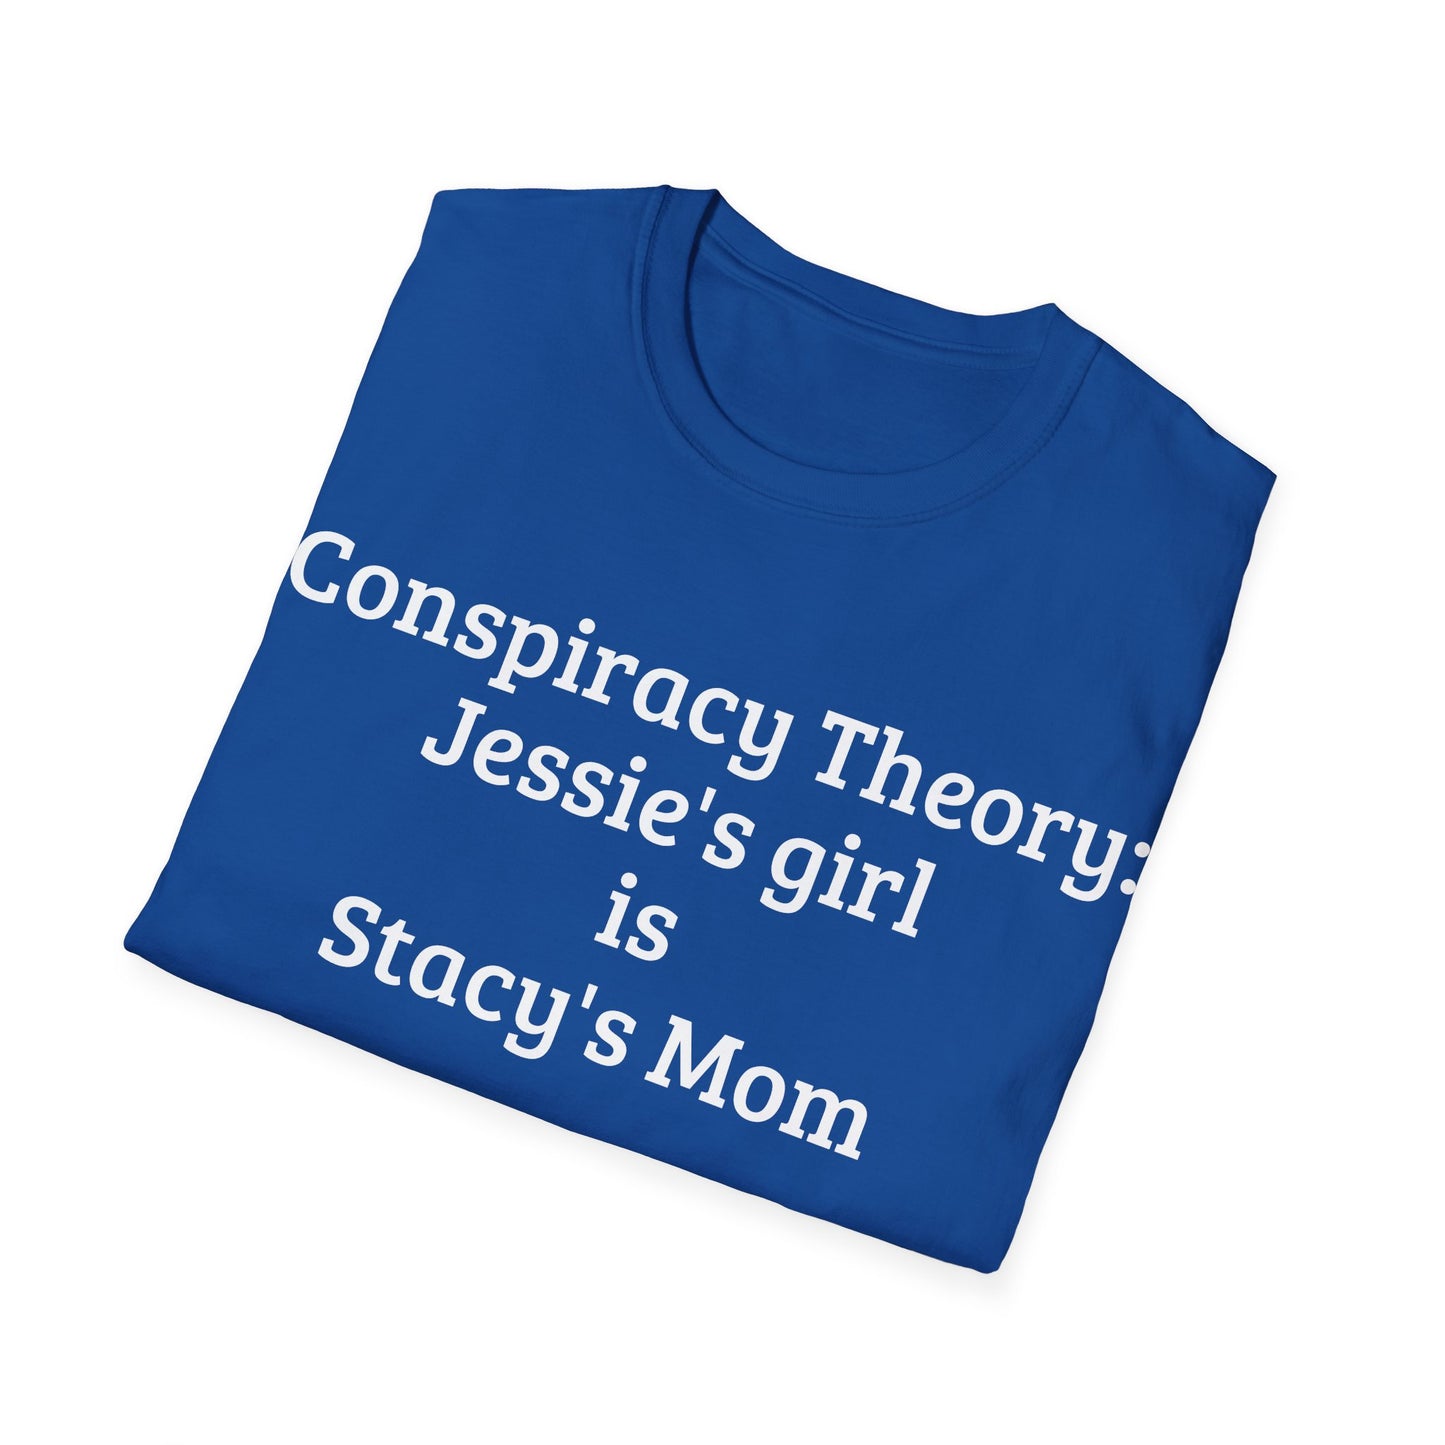 Conspiracy Theory: Jessie's Girl is Stacy's Mom